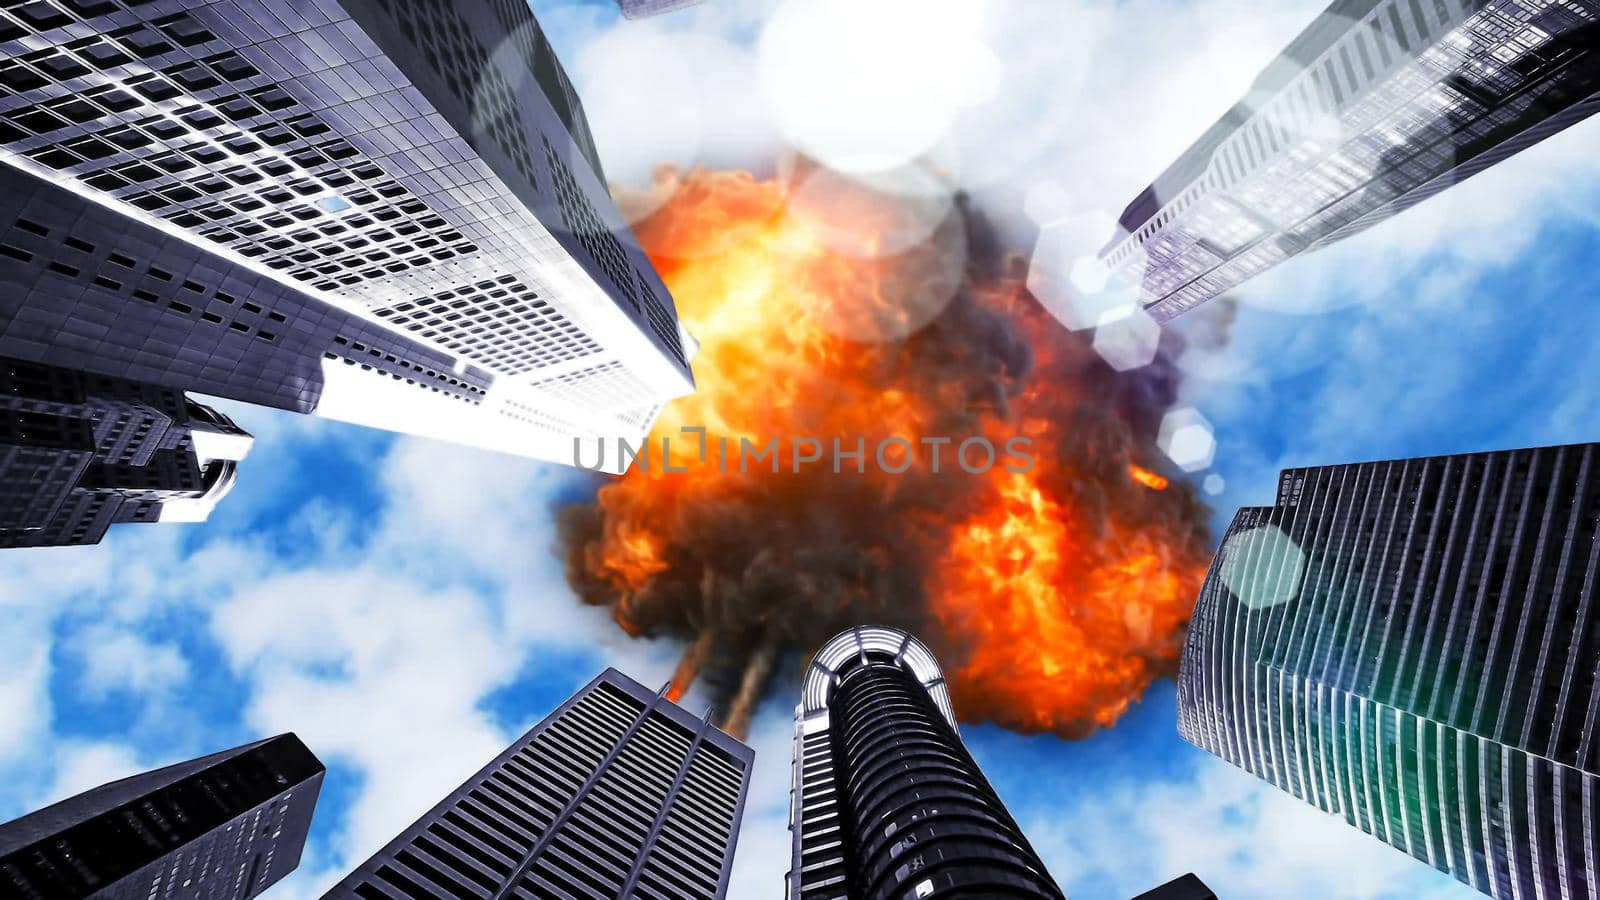 Meteor explodes in the sky over skyscrapers 3D rendering by designprojects